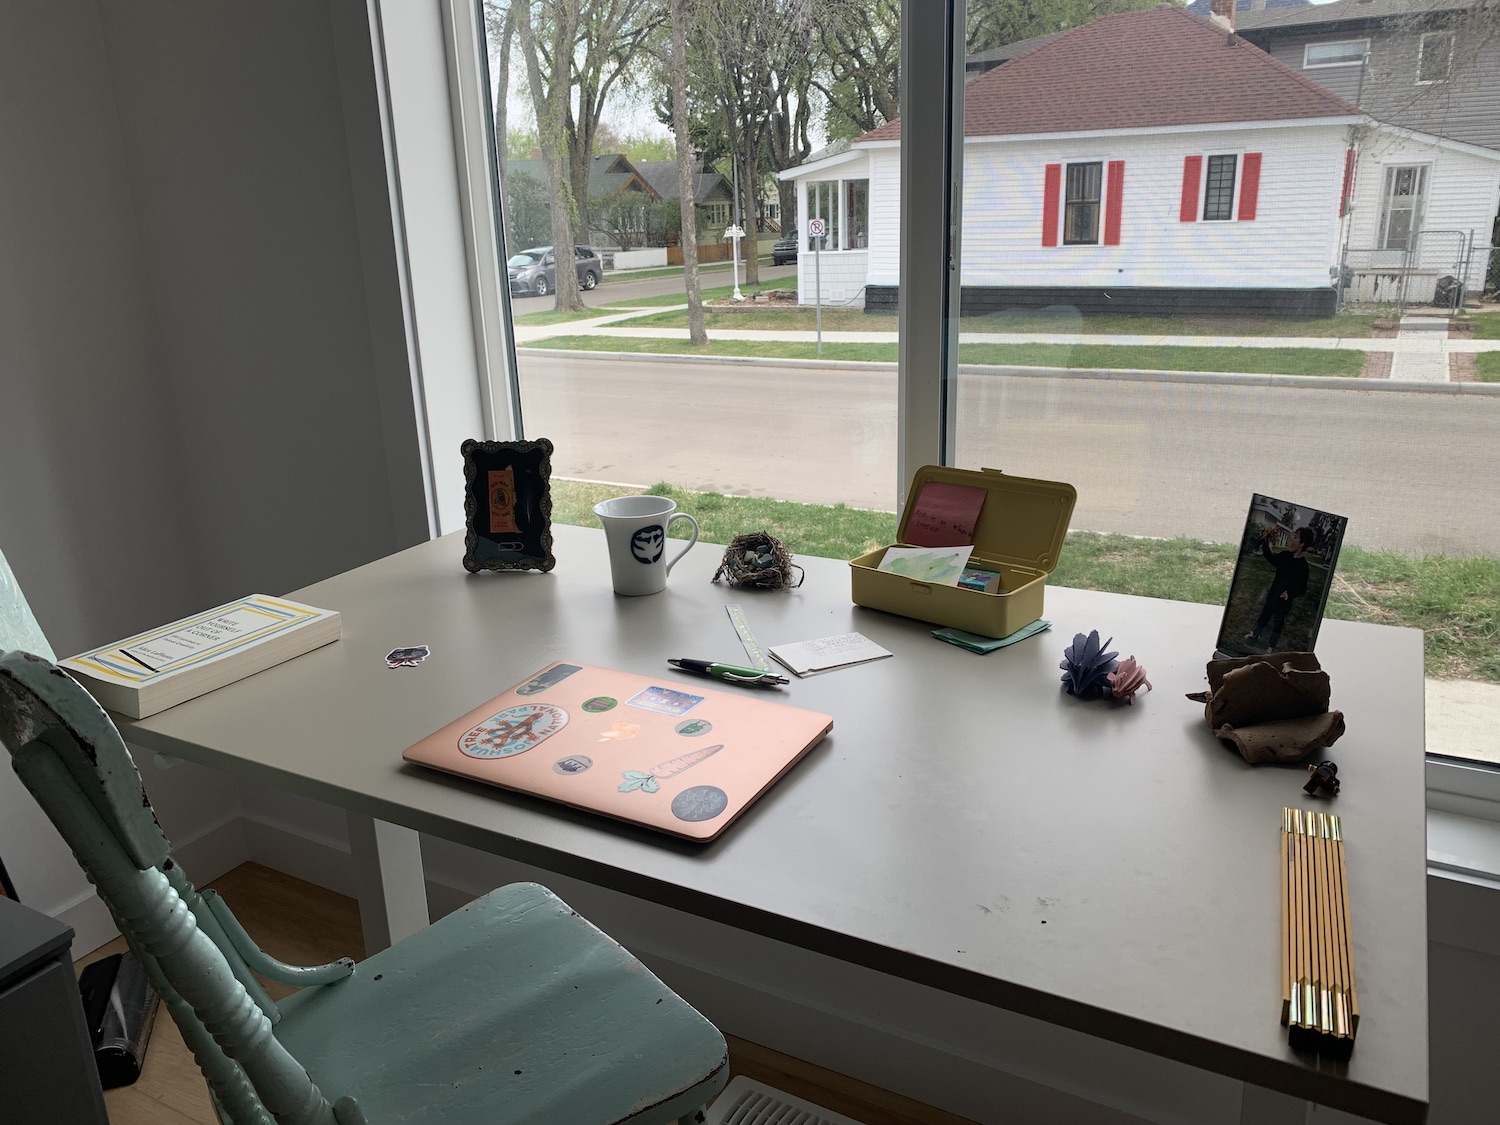 A photograph of Robyn Braun's workspace. An antique painted chair waits at a plain desk, which is scattered with photo frames, writing implements, a mug, and a closed laptop covered in stickers. A folding ruler sits in the corner. Out the window, there is a white house with red shutters visible across the street.